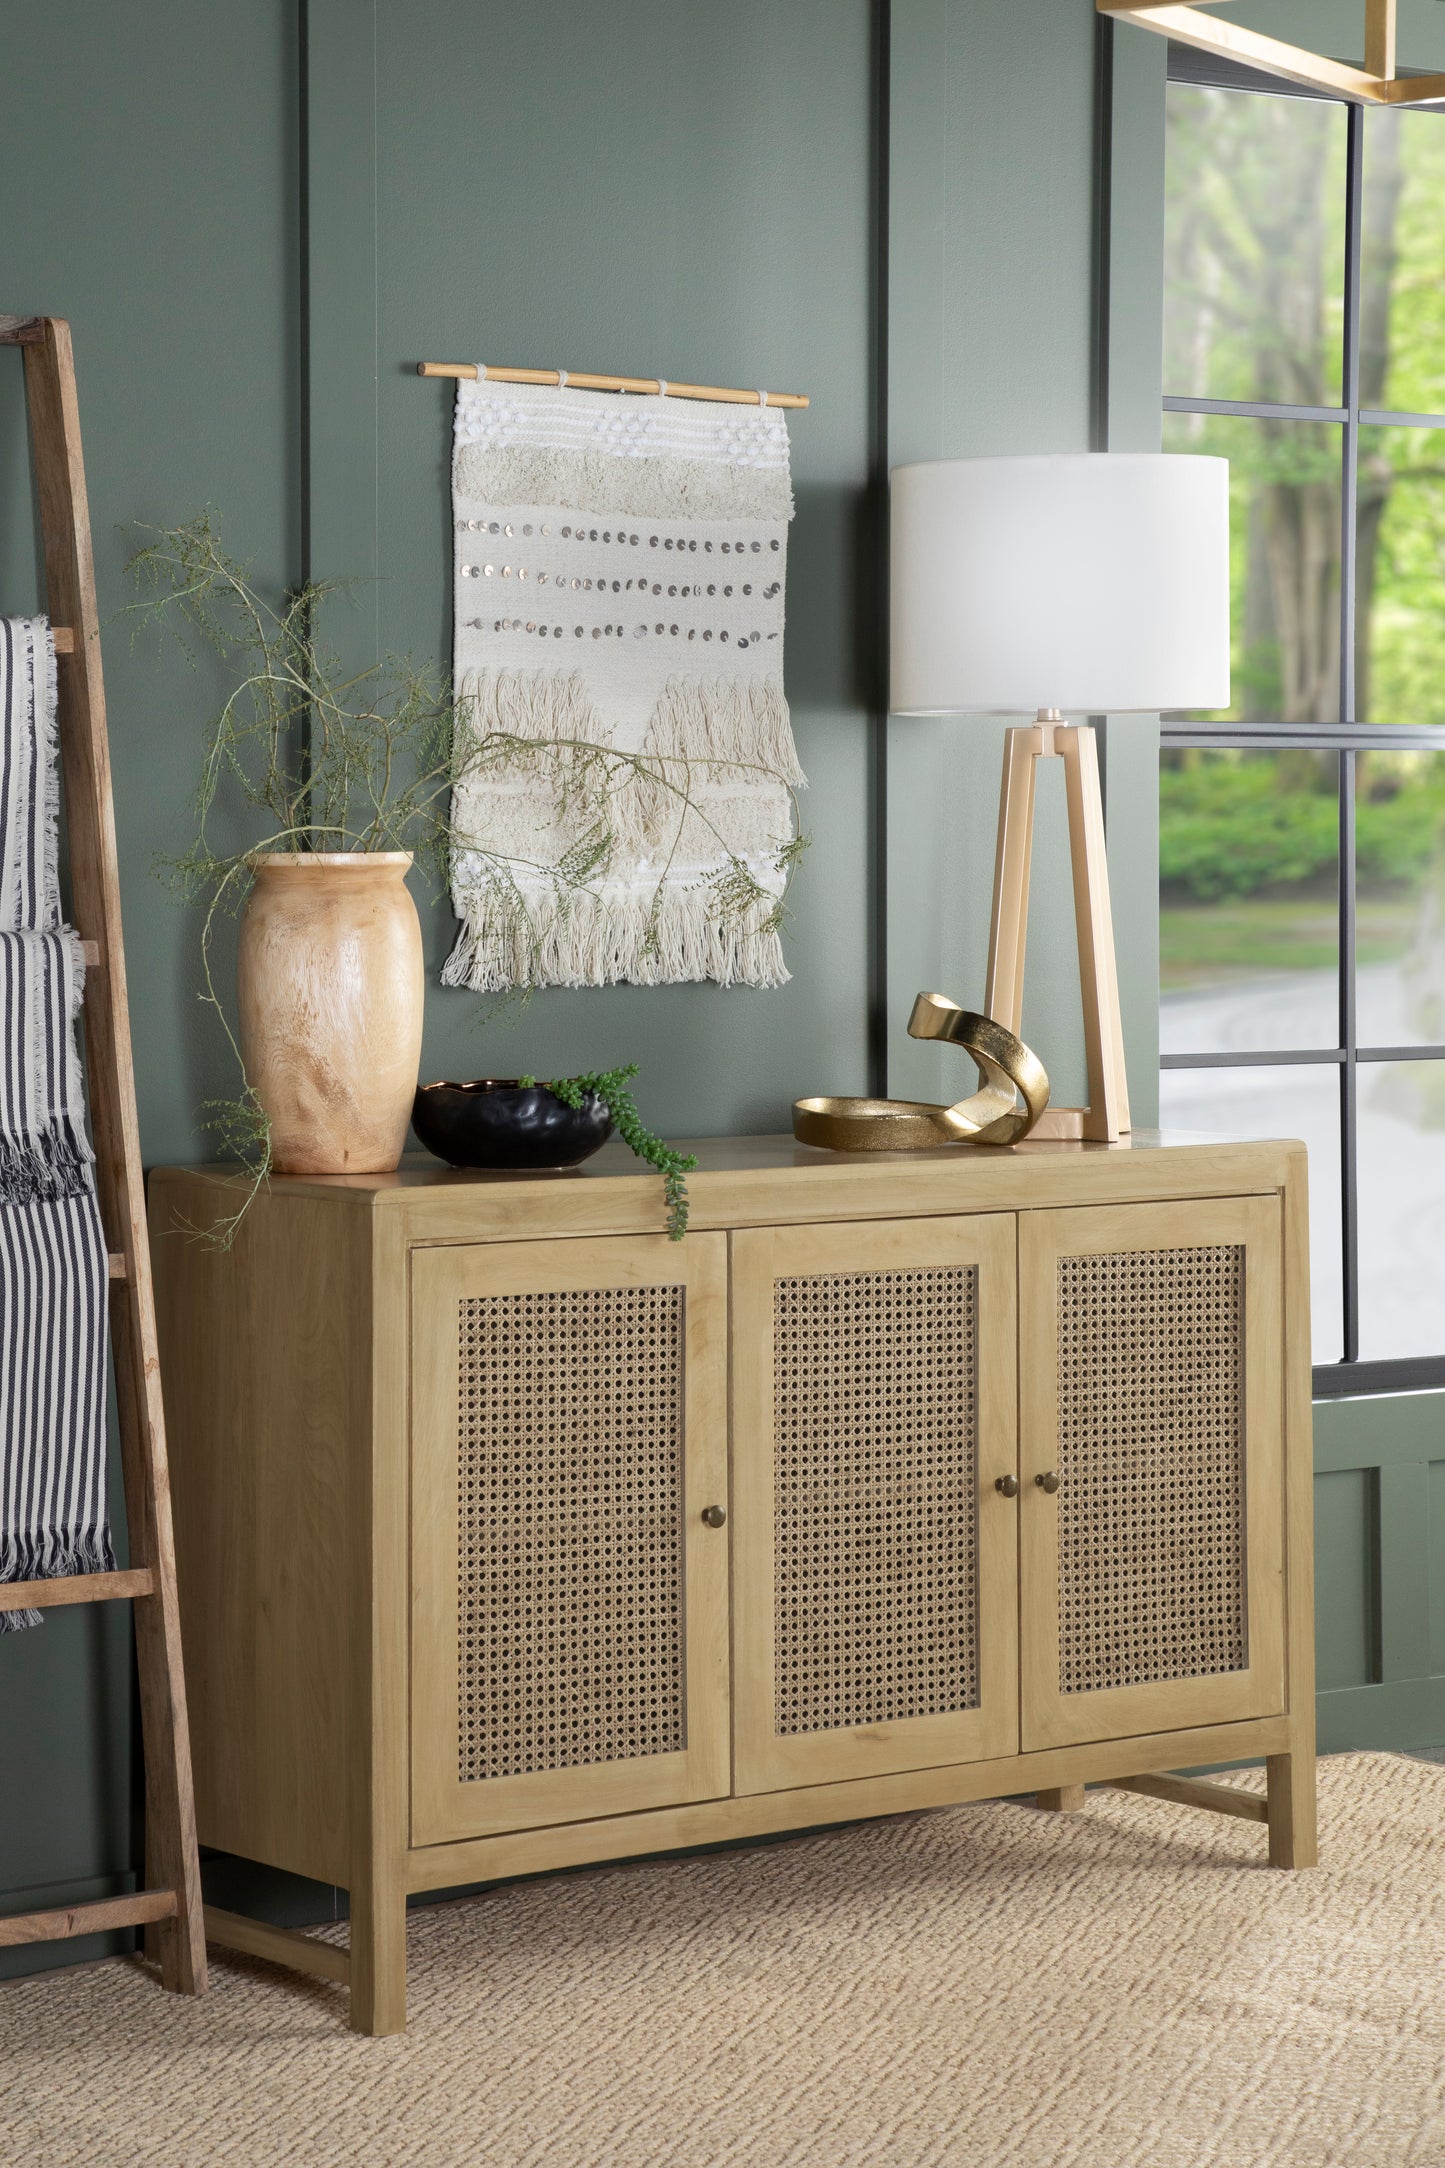 Zamora 3-door Wood Accent Cabinet with Woven Cane Natural